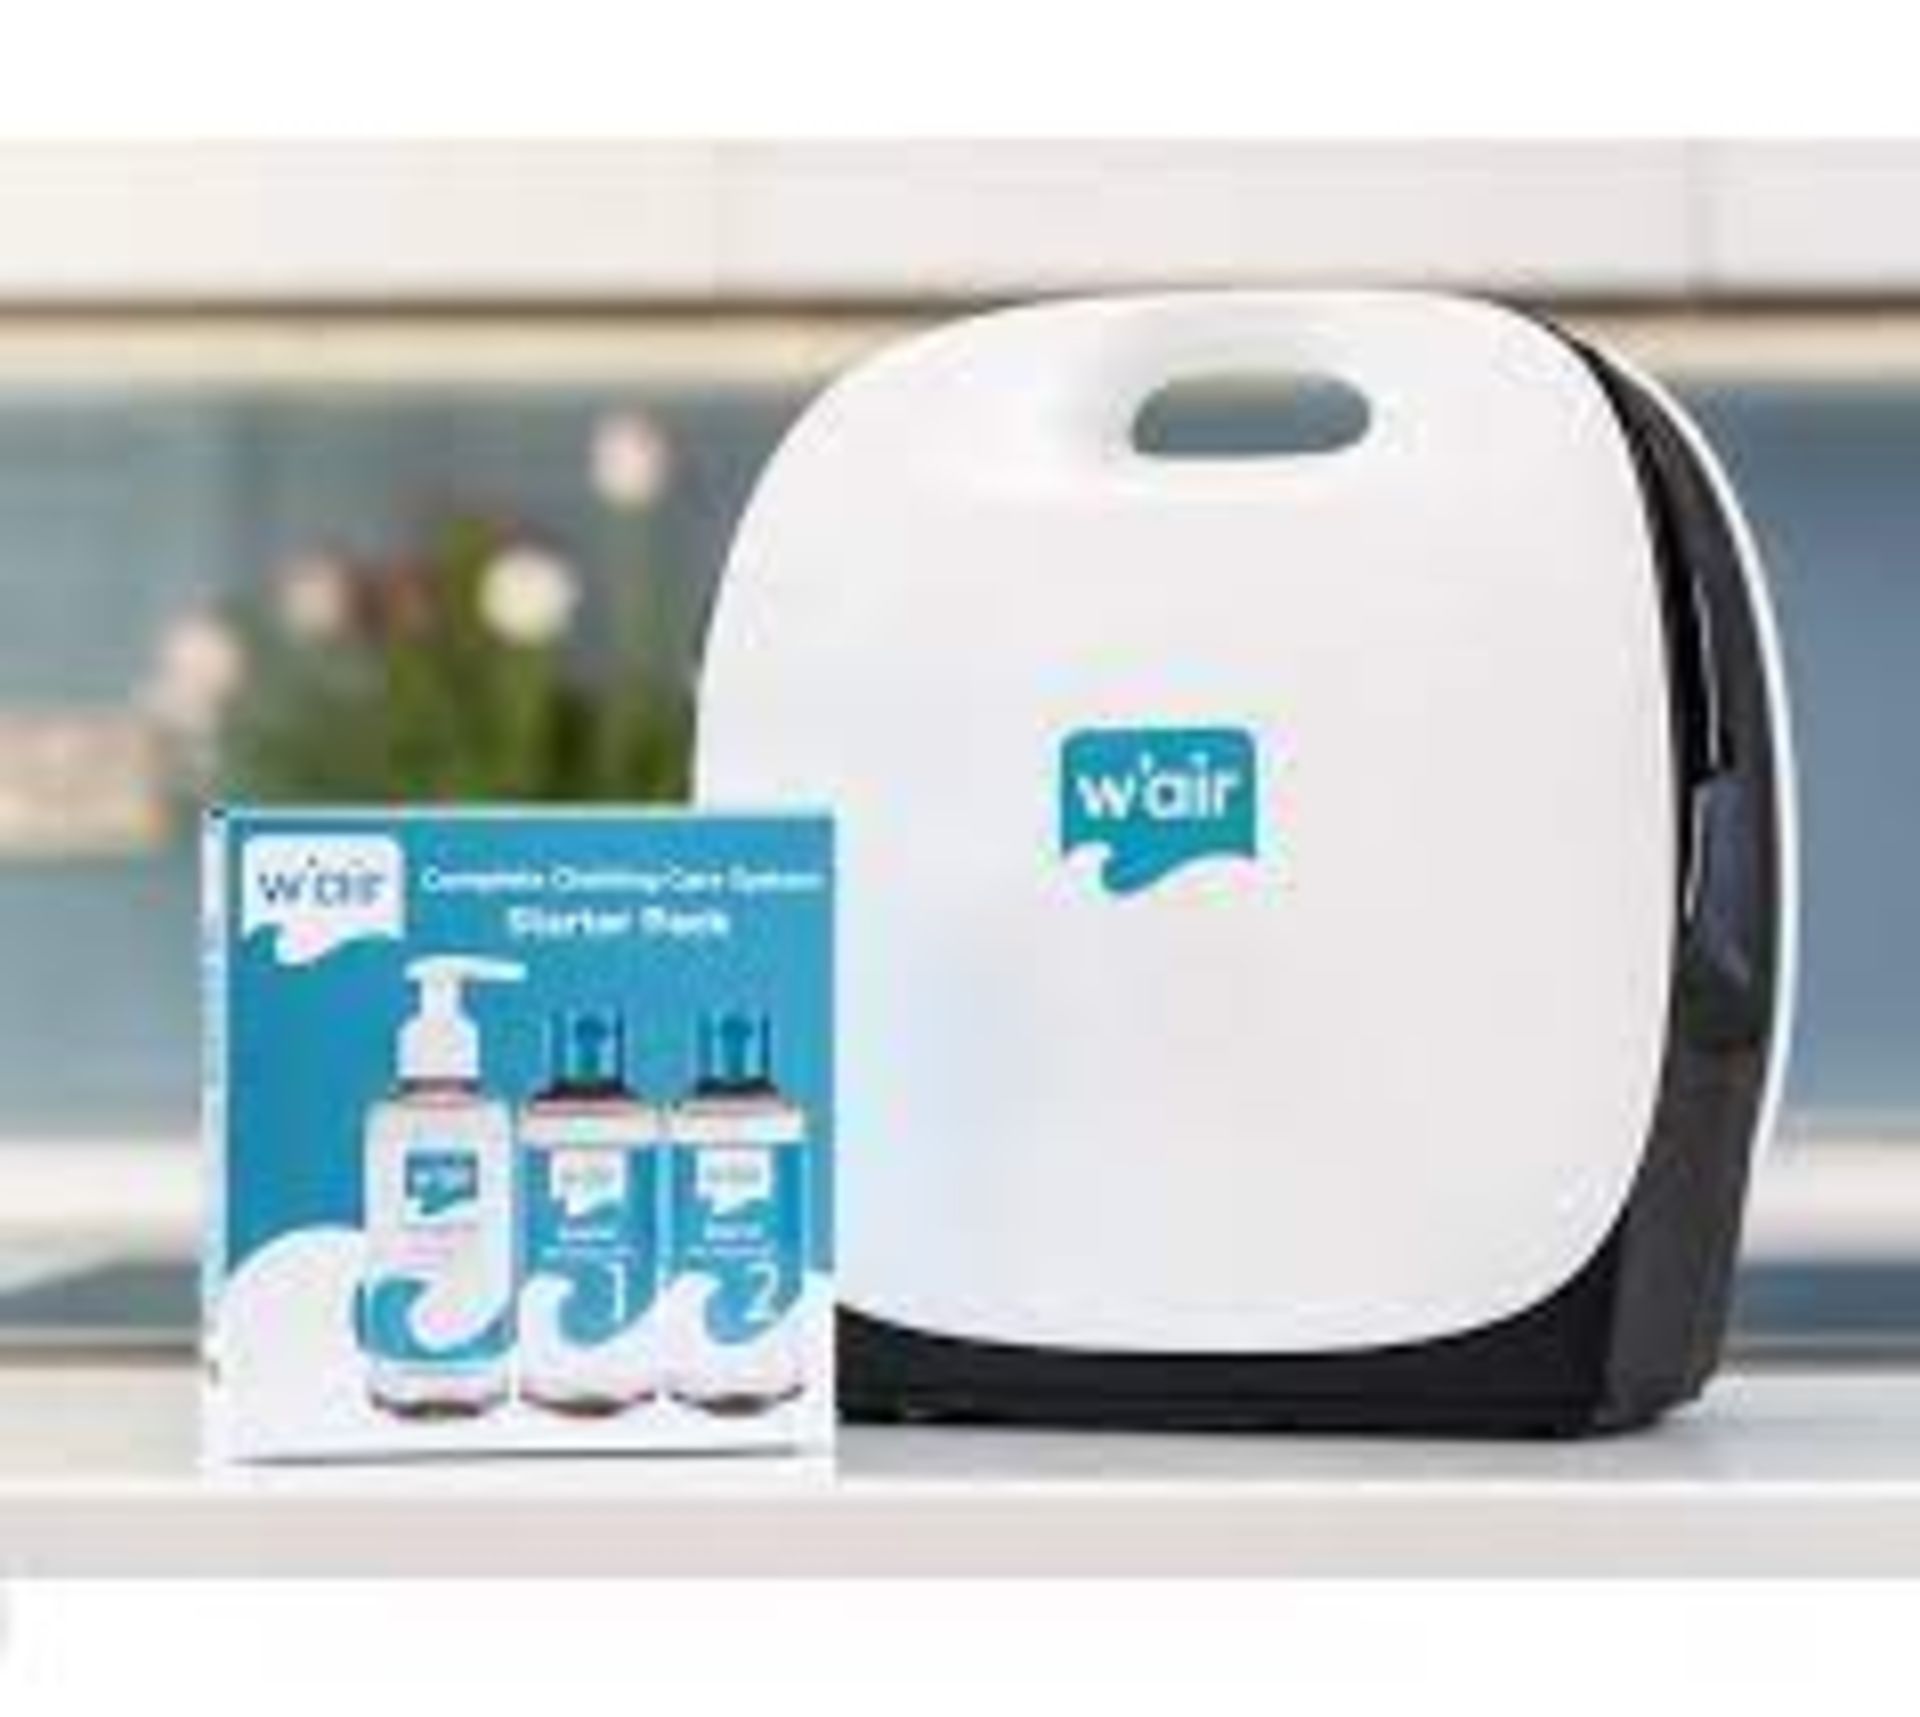 5 X BRAND NEW W'AIR SNEAKER CLEANING SYSTEMS RRP £299, The w'air uses hydrodynamic technology - Image 6 of 6